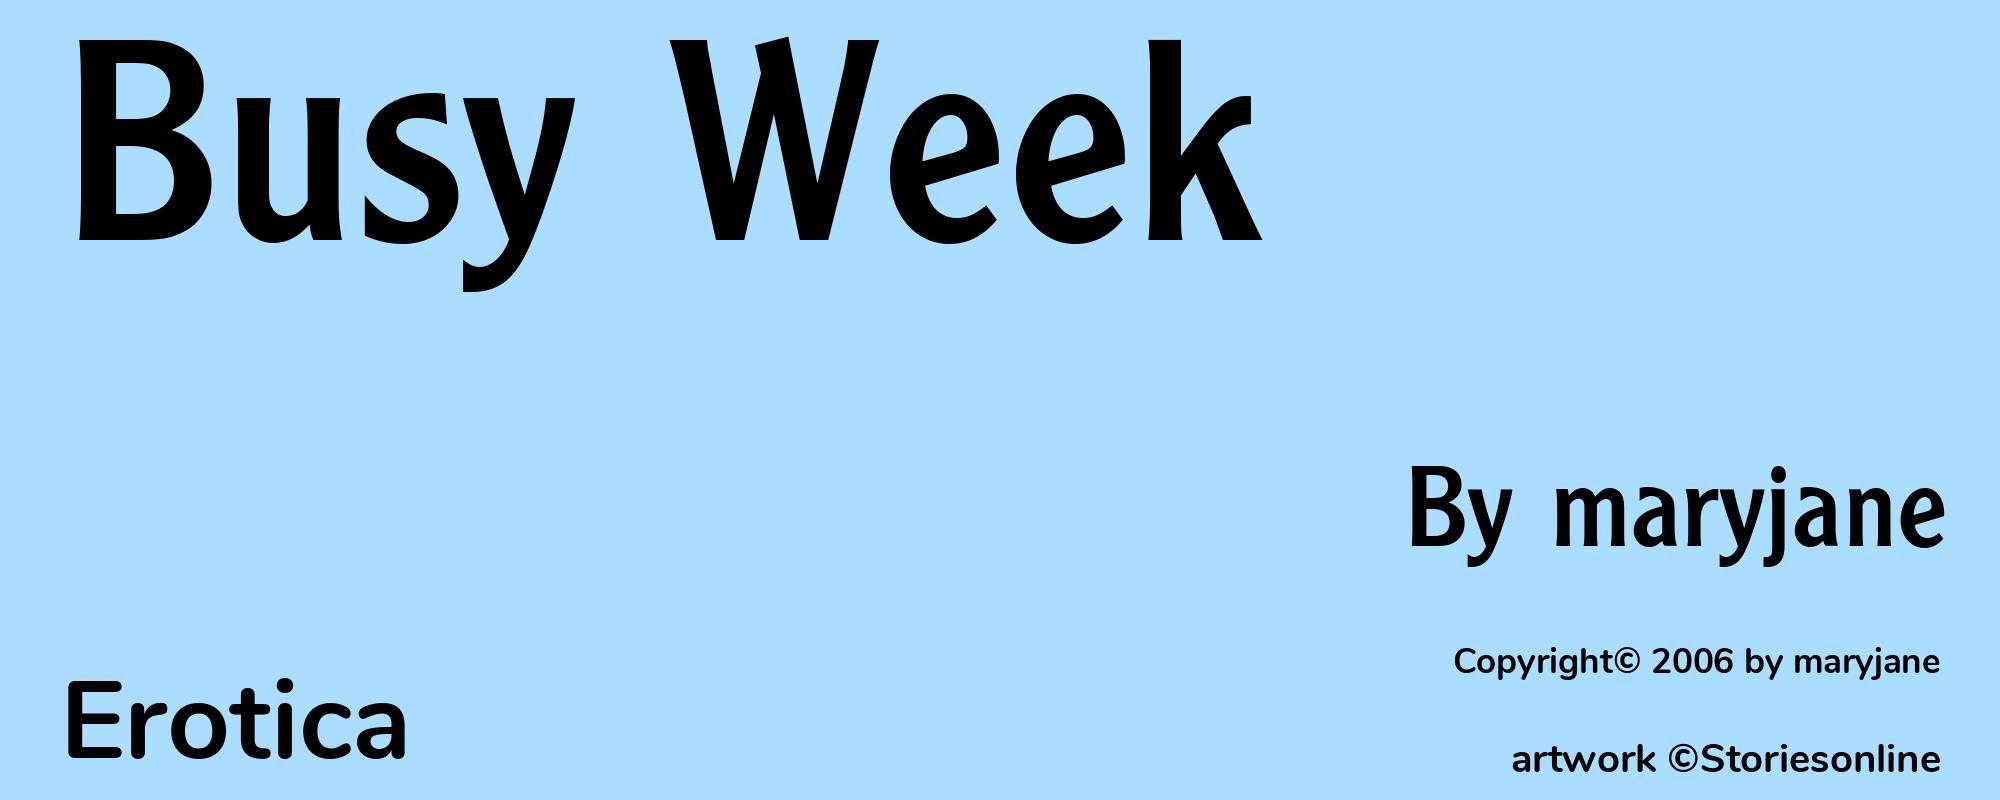 Busy Week - Cover